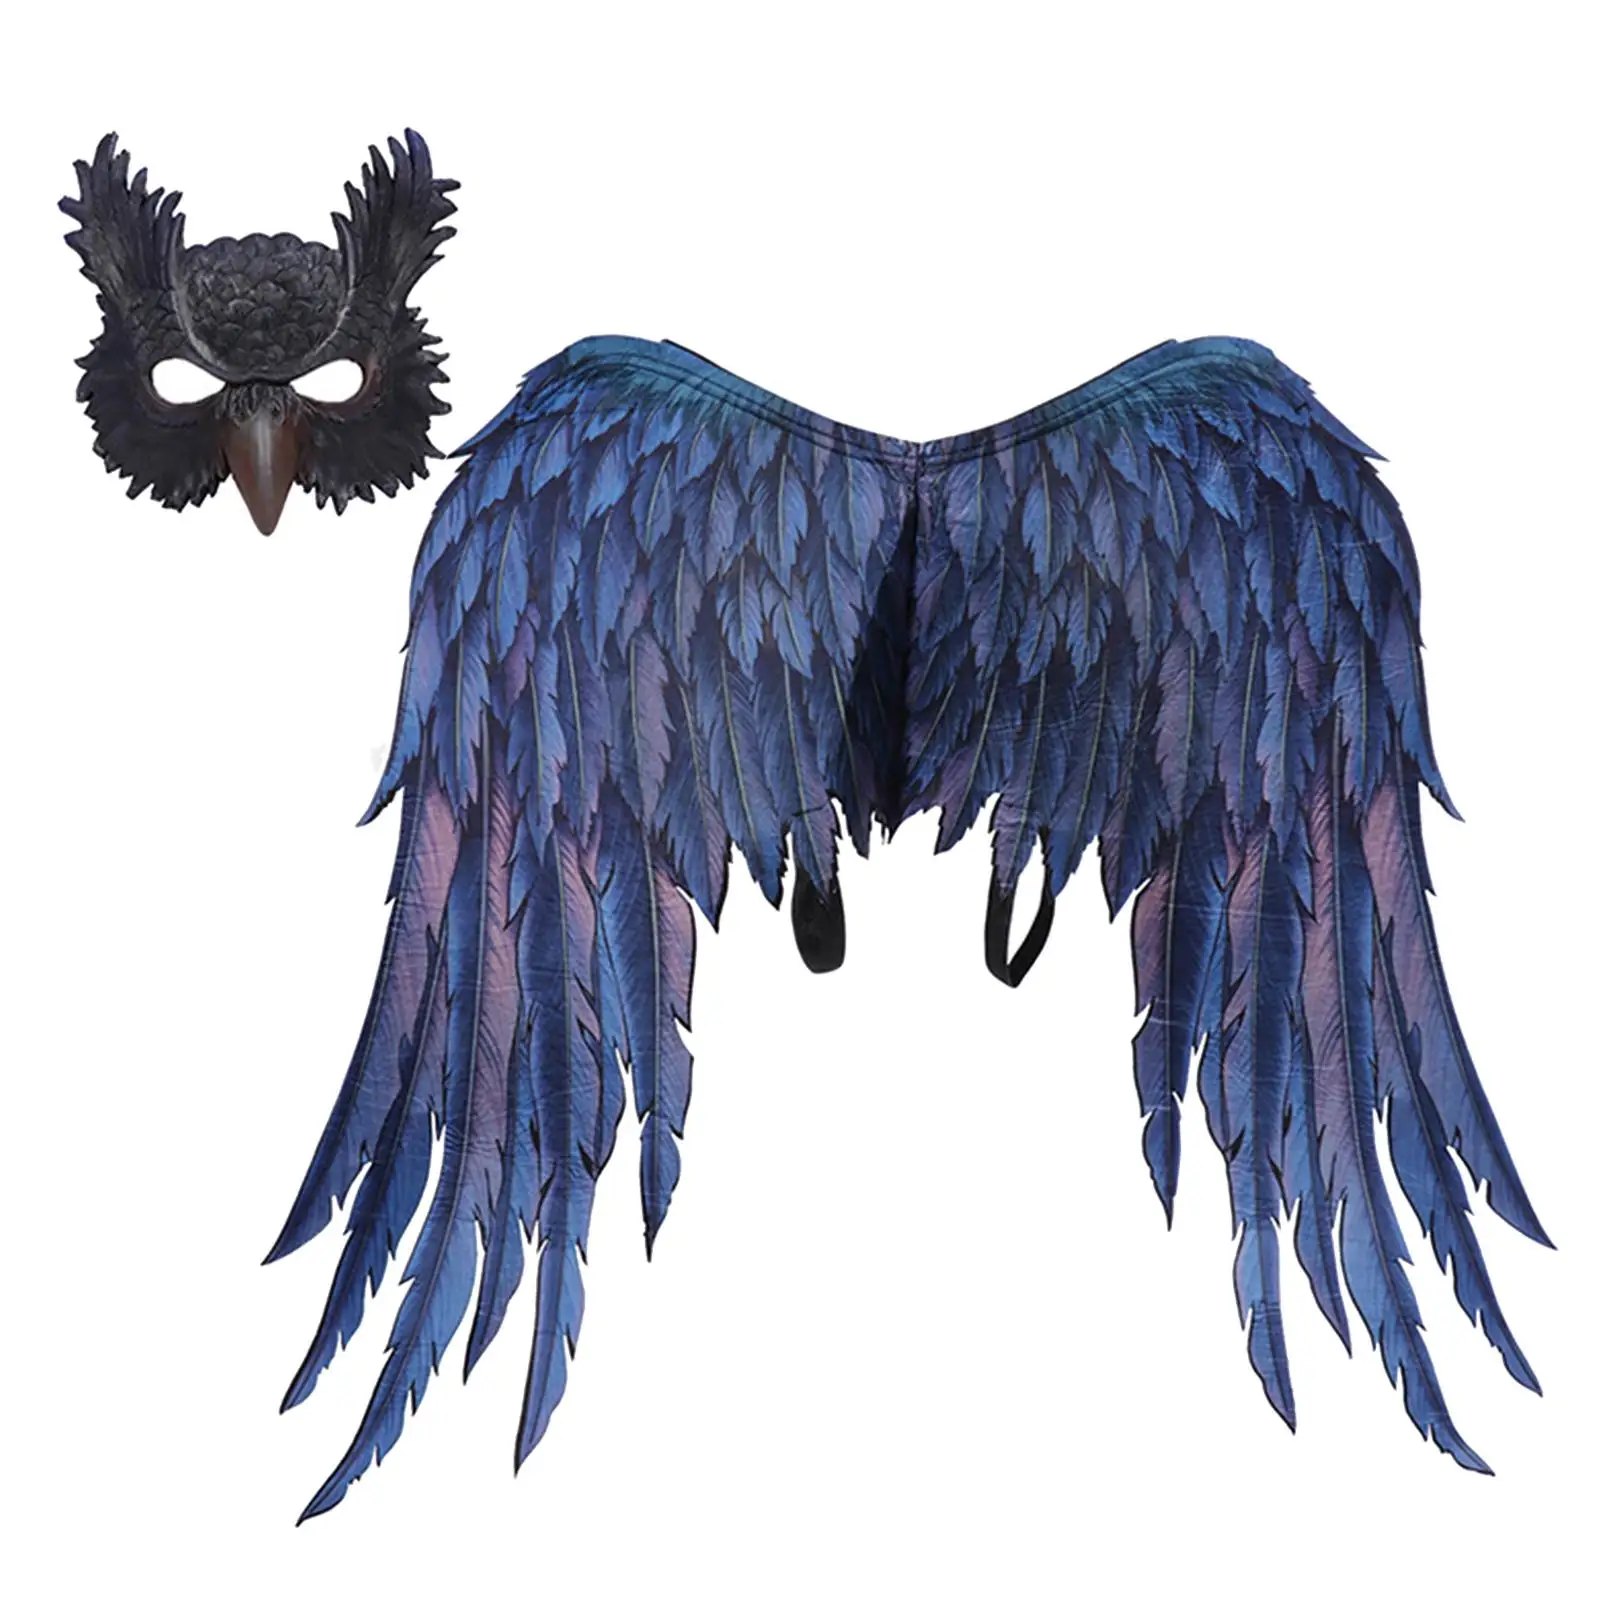 Creative Halloween Cosplay Mask Kit Cosplay Costume Animal Owl Mask Wings Lightweight Role Play Mask for Carnival Decoration